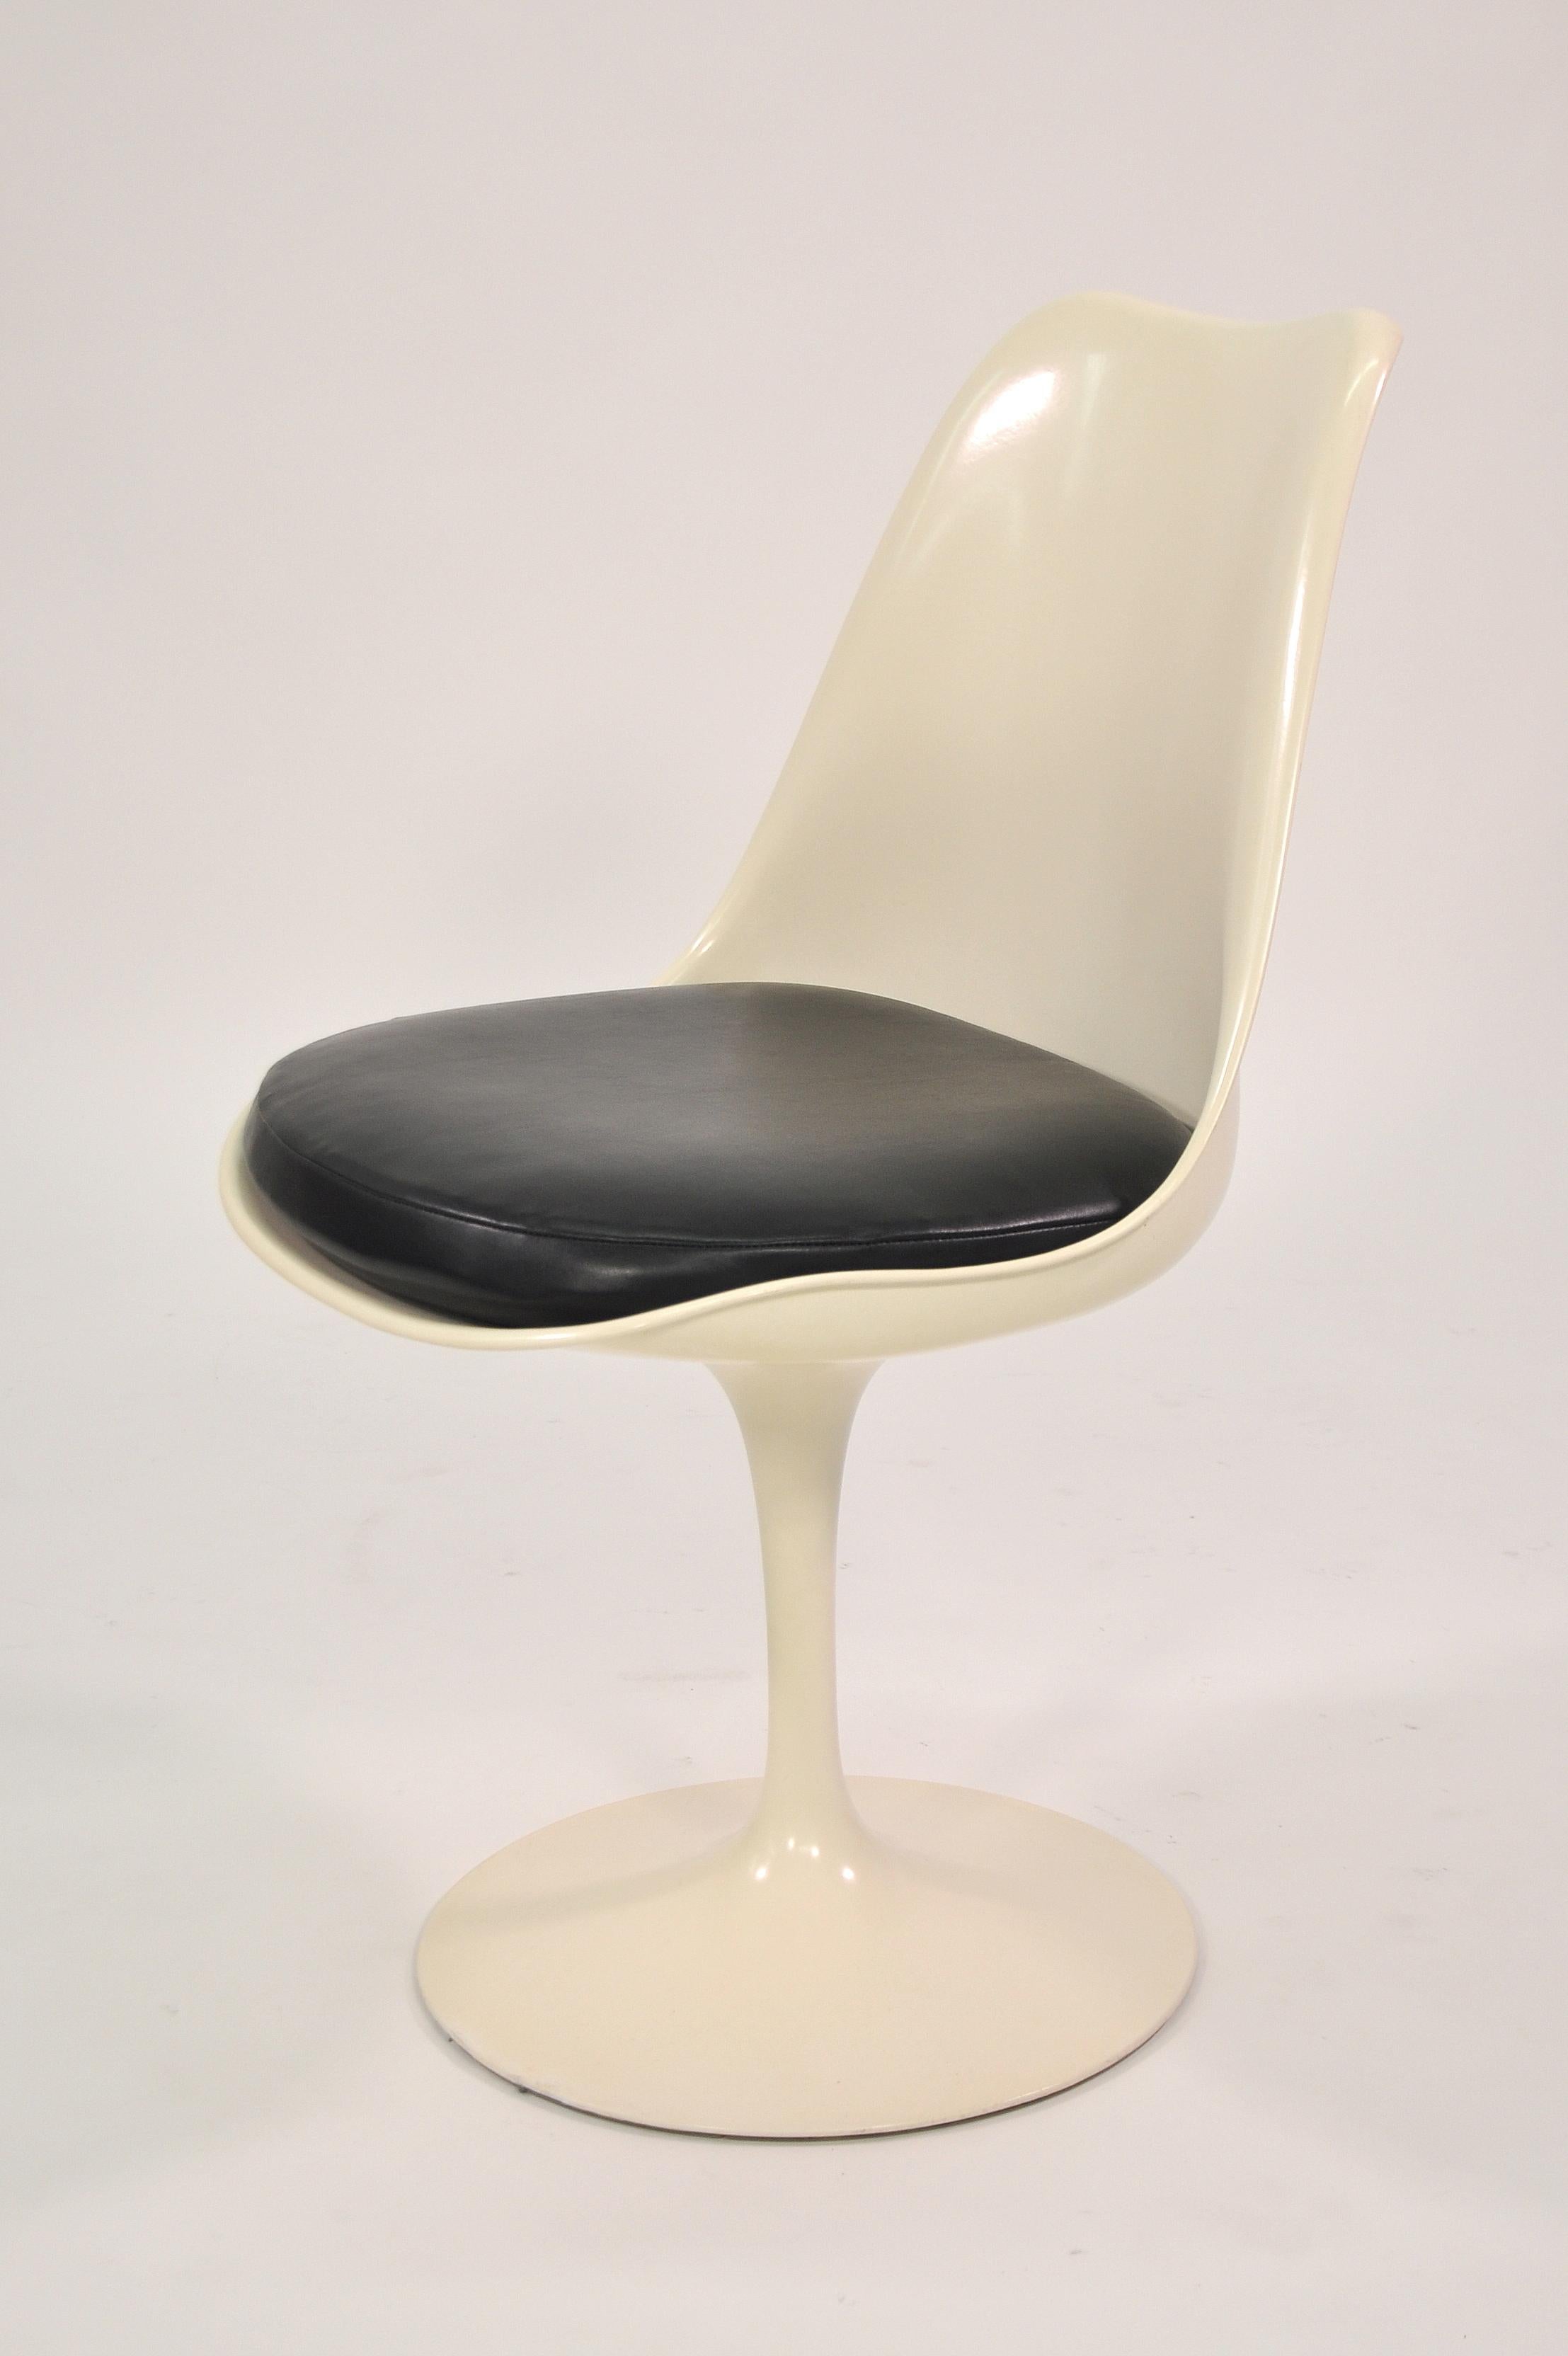 A vintage 1960s set of four Mid-Century Modern white Tulip dining chairs with black vinyl seats. The chairs have their original finish with beautiful patina. The Tulip chair is very comfortable and can also be used as an office chair. Eero